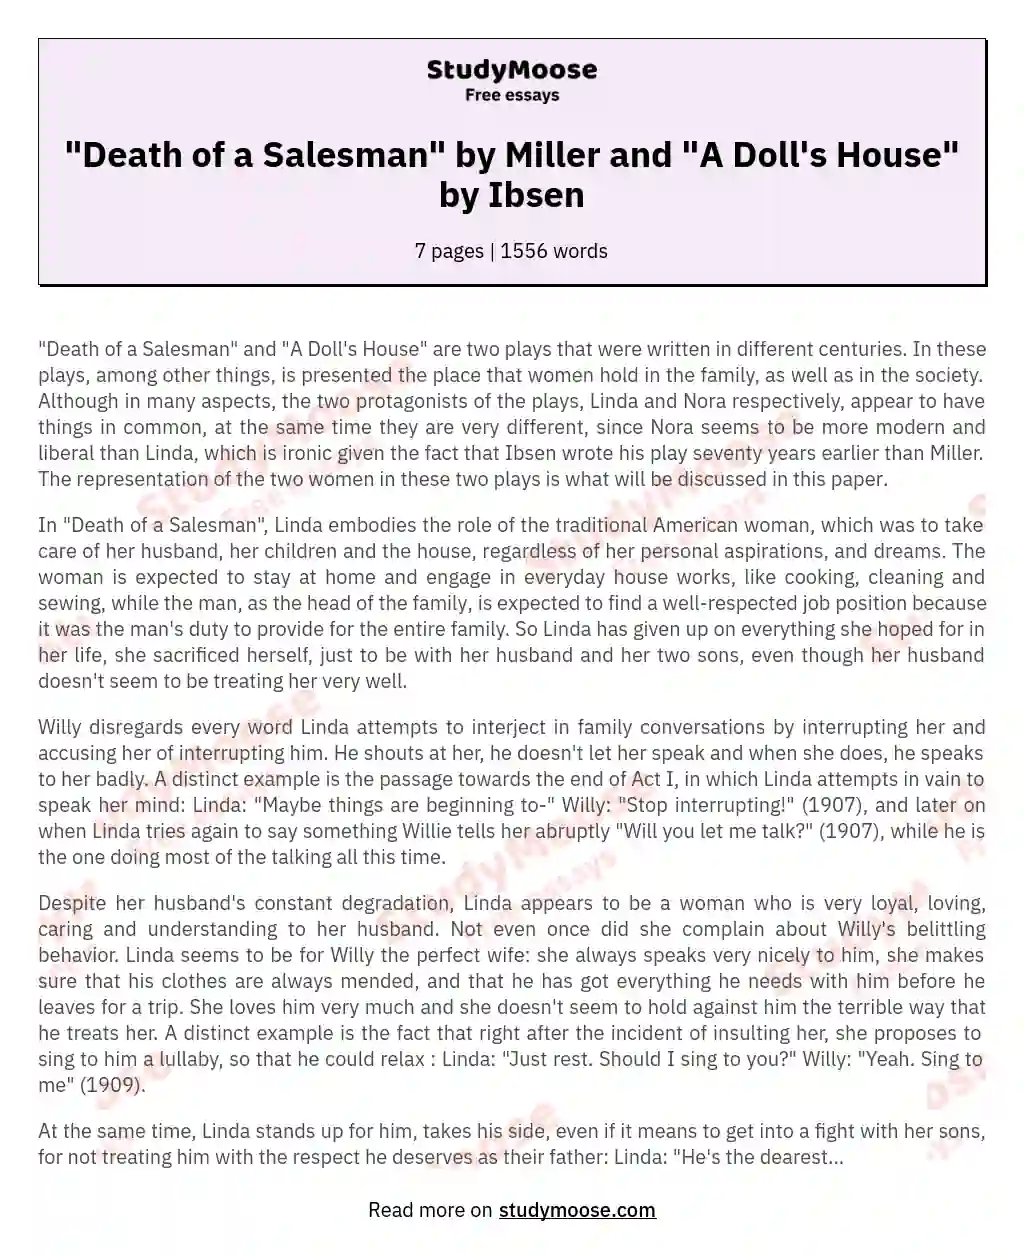 "Death of a Salesman" by Miller and "A Doll's House" by Ibsen